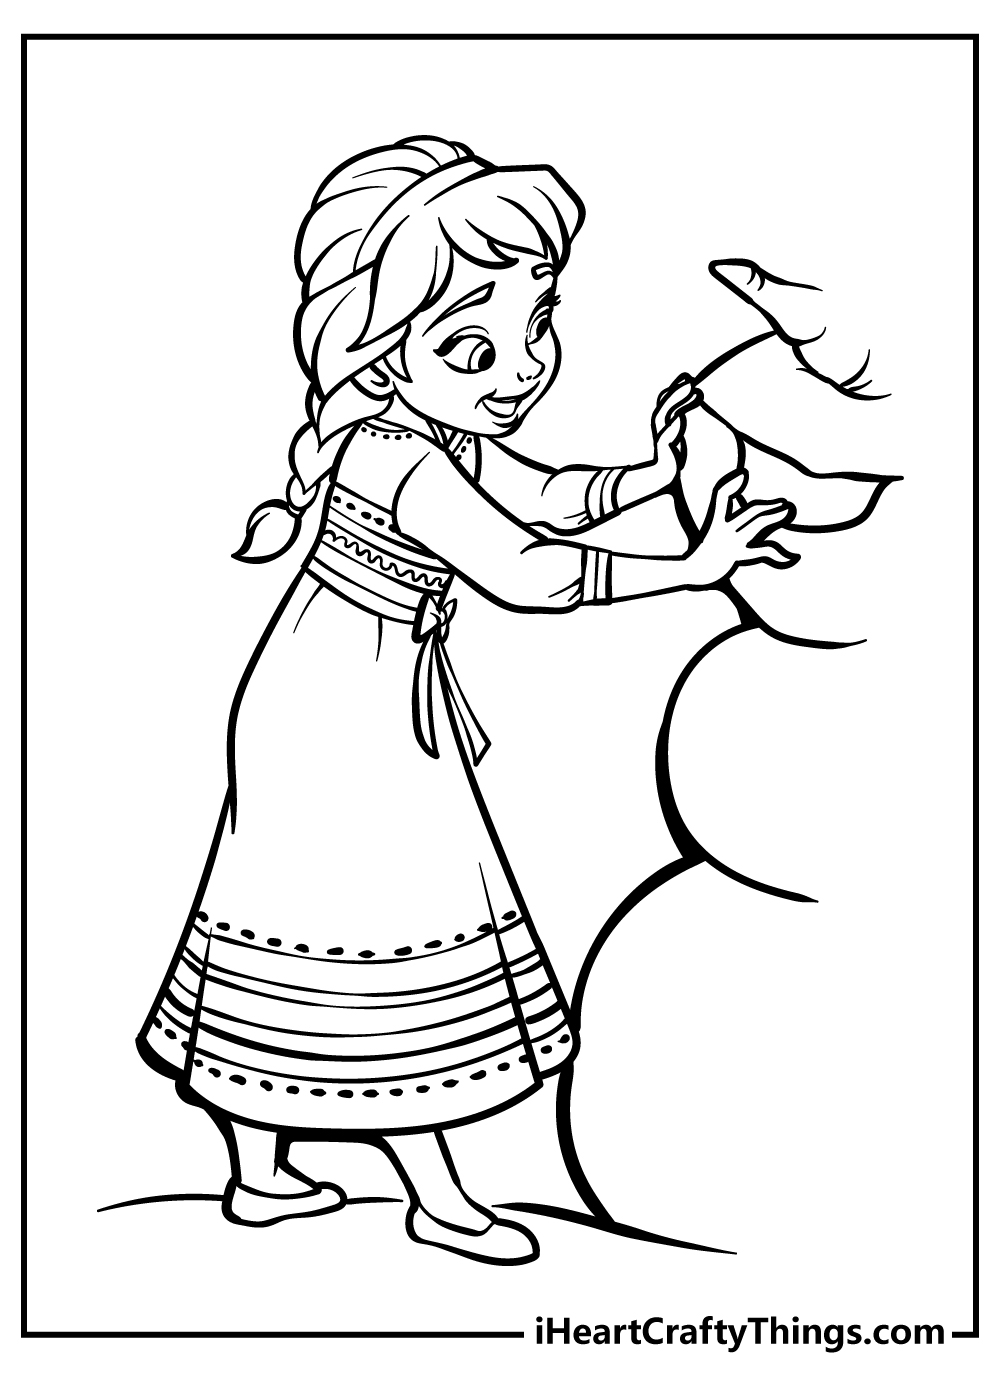 Frozen Easy Coloring Pages